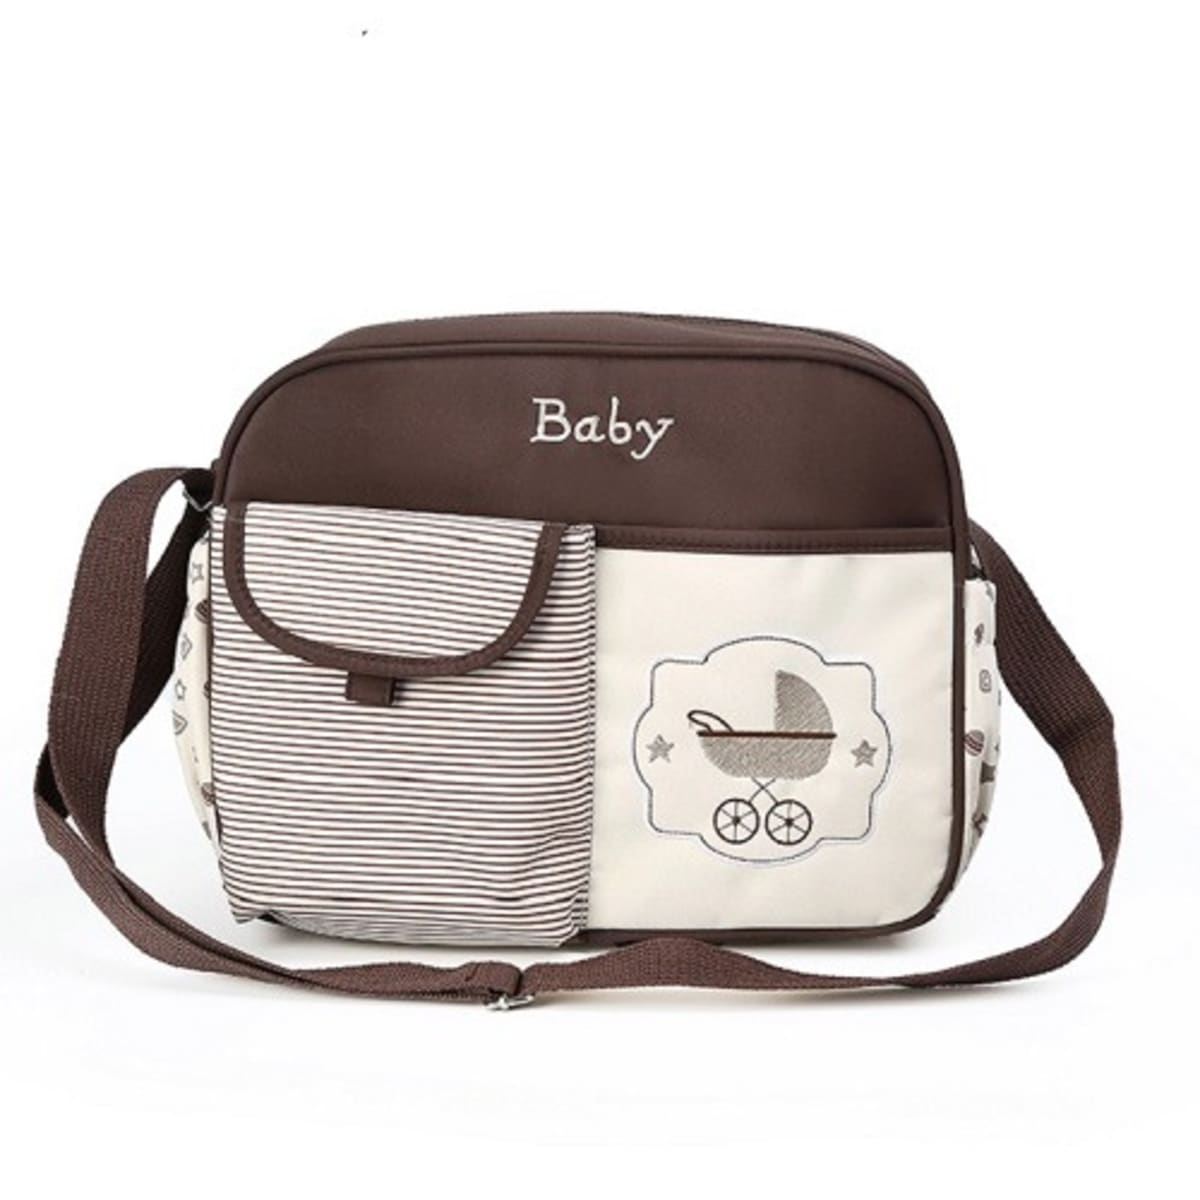 Baby Diaper Bag Small | IttyBitty